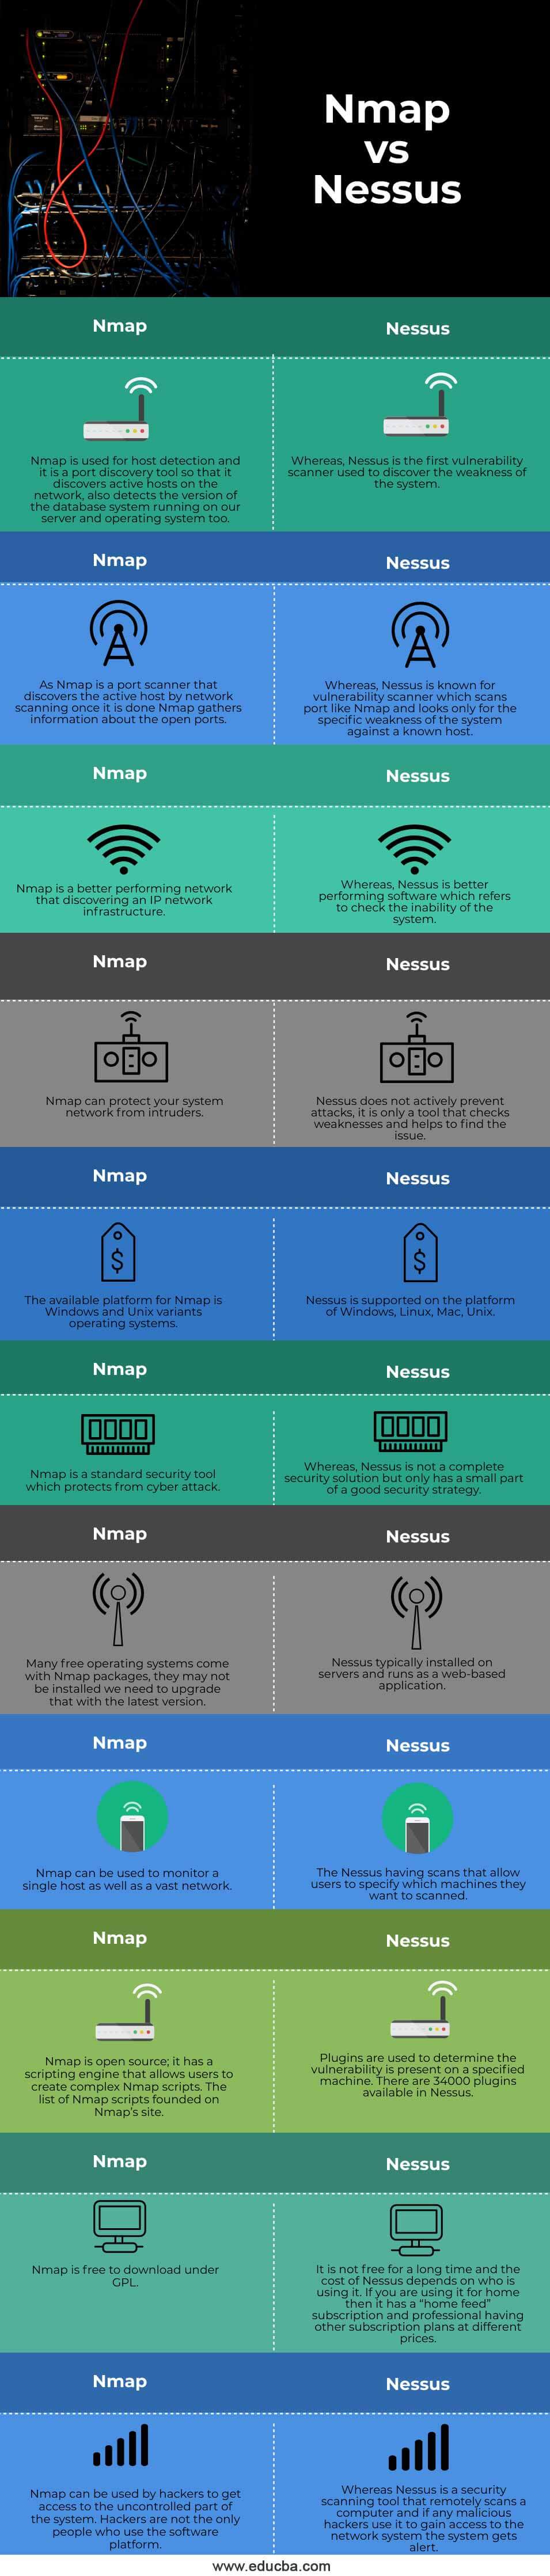 What is Nessus vs Nmap?